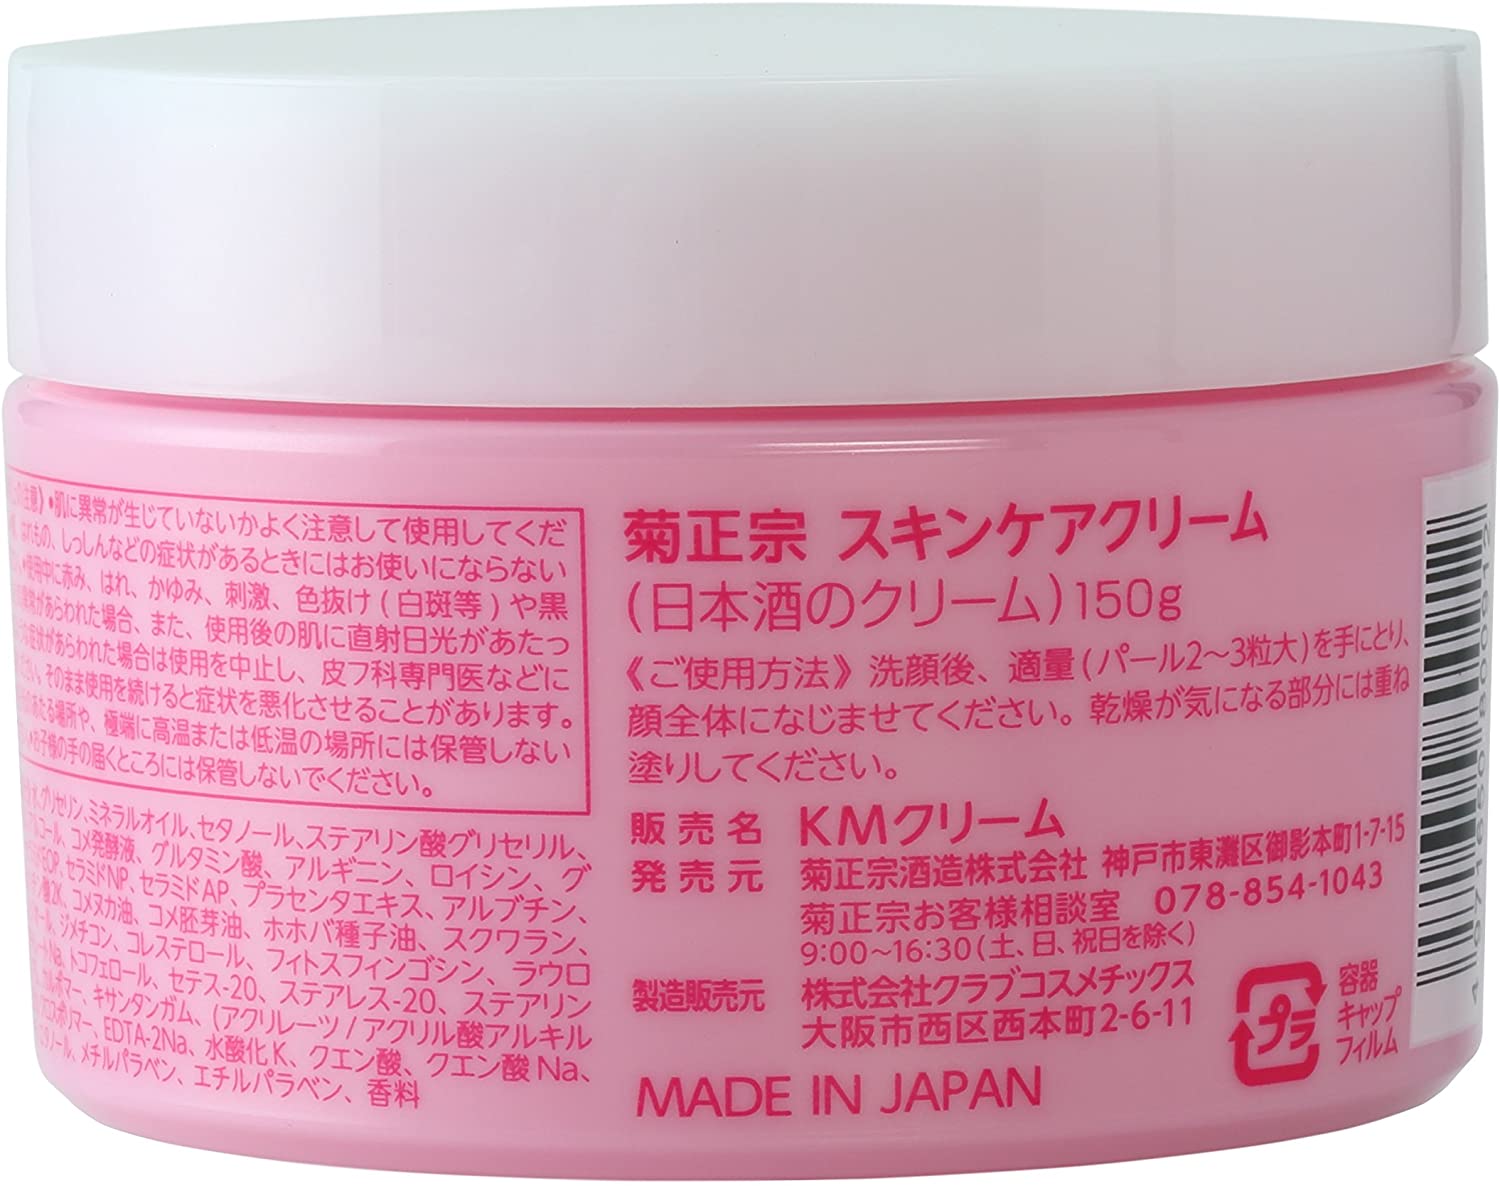 Canmake Cherry Fromage Lip and Cheek Gel Dual - Use Makeup 1.5g - YOYO JAPAN